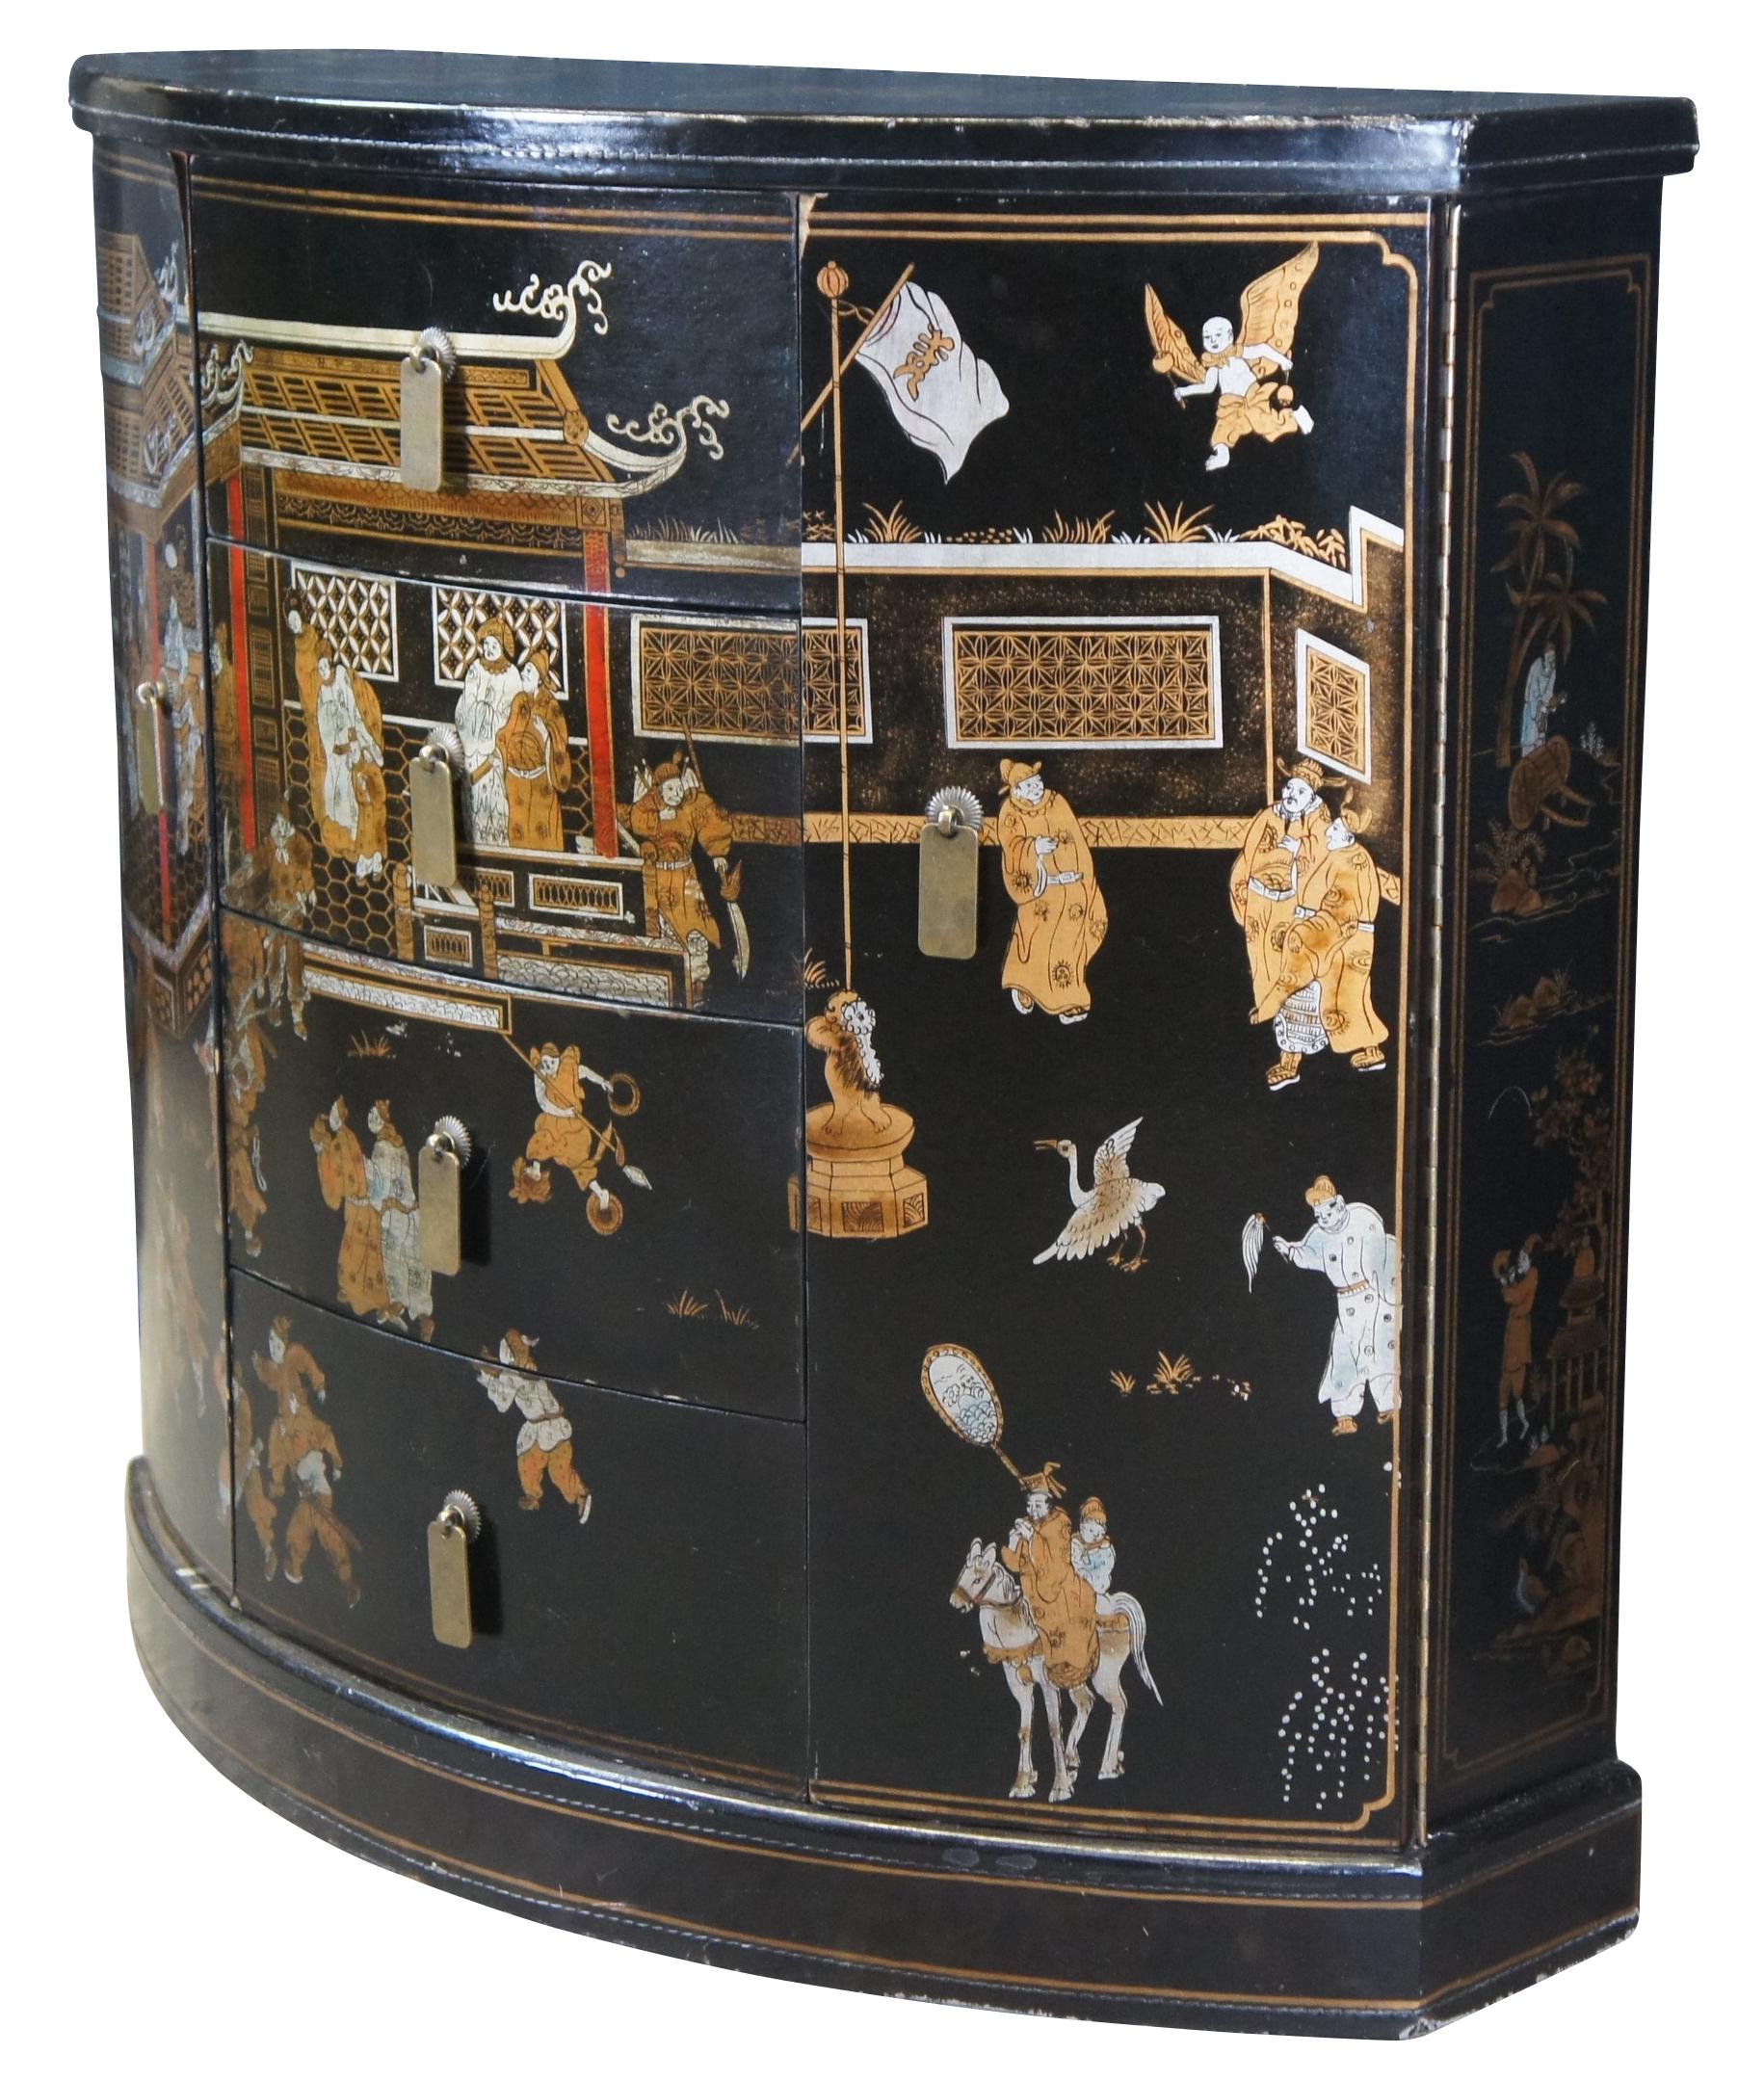 A quaint Oriental bow-front black lacquer console table. Made from elm wood with hand stitched faux leather trim on the edges. It has been decorated with a beautiful hand-painted chinoiserie village scene and a traditional lacquer finish. The drawer